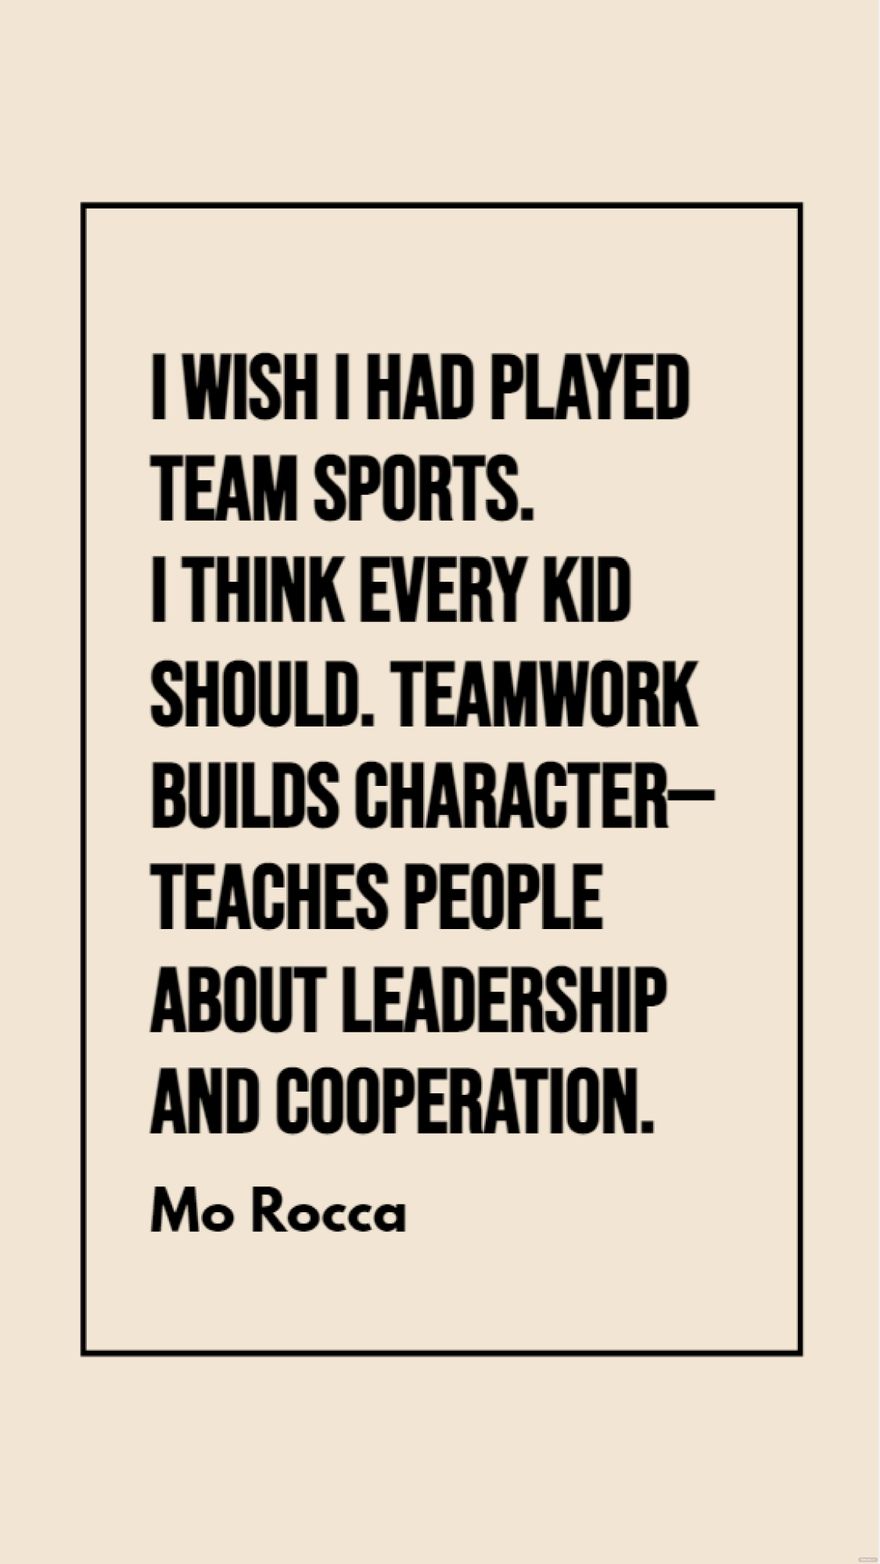 Mo Rocca - I wish I had played team sports. I think every kid should. Teamwork builds character - teaches people about leadership and cooperation. in JPG